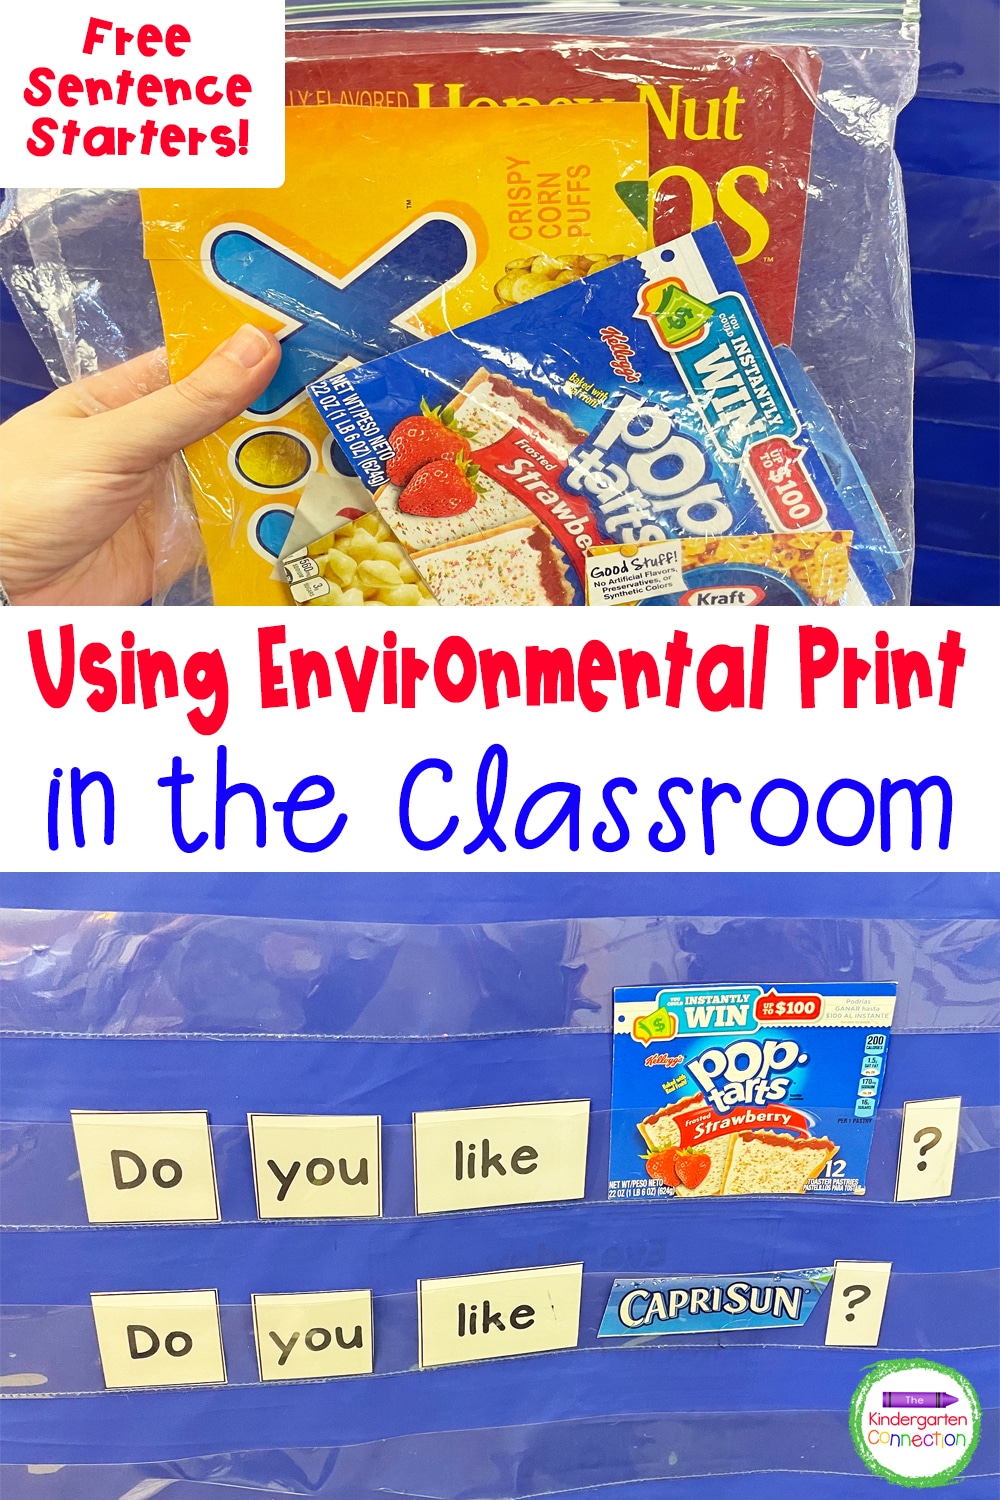 Check out how using environmental print in the classroom can strengthen literacy skills and add tons of fun to your lessons!